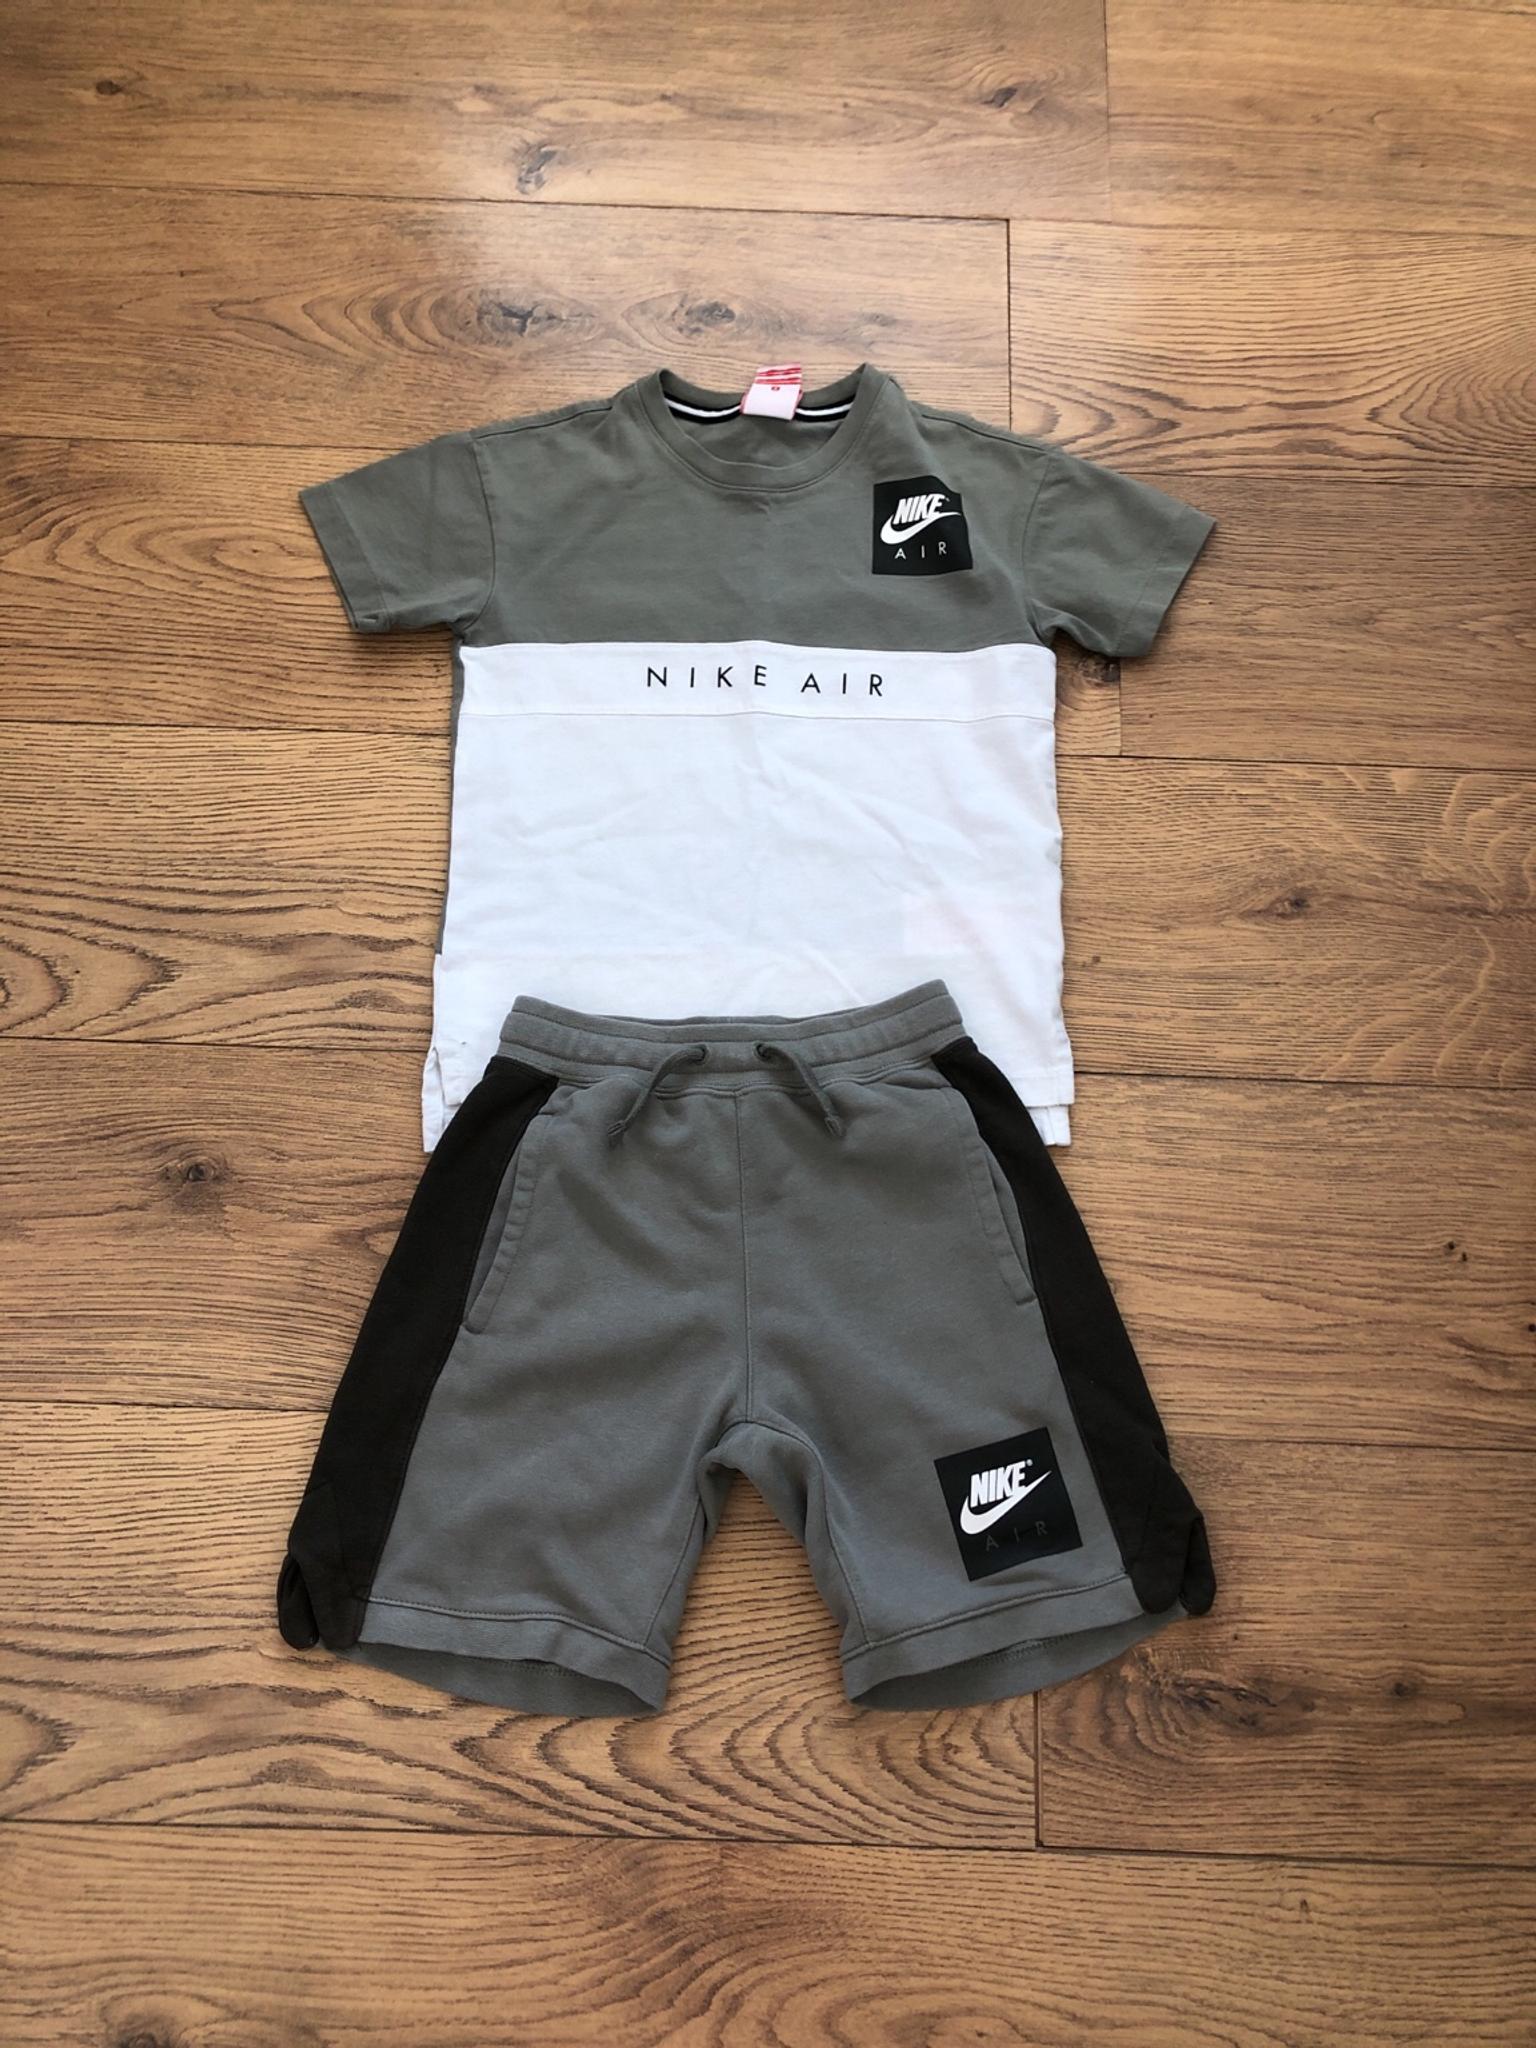 nike shorts and t shirts cheap online